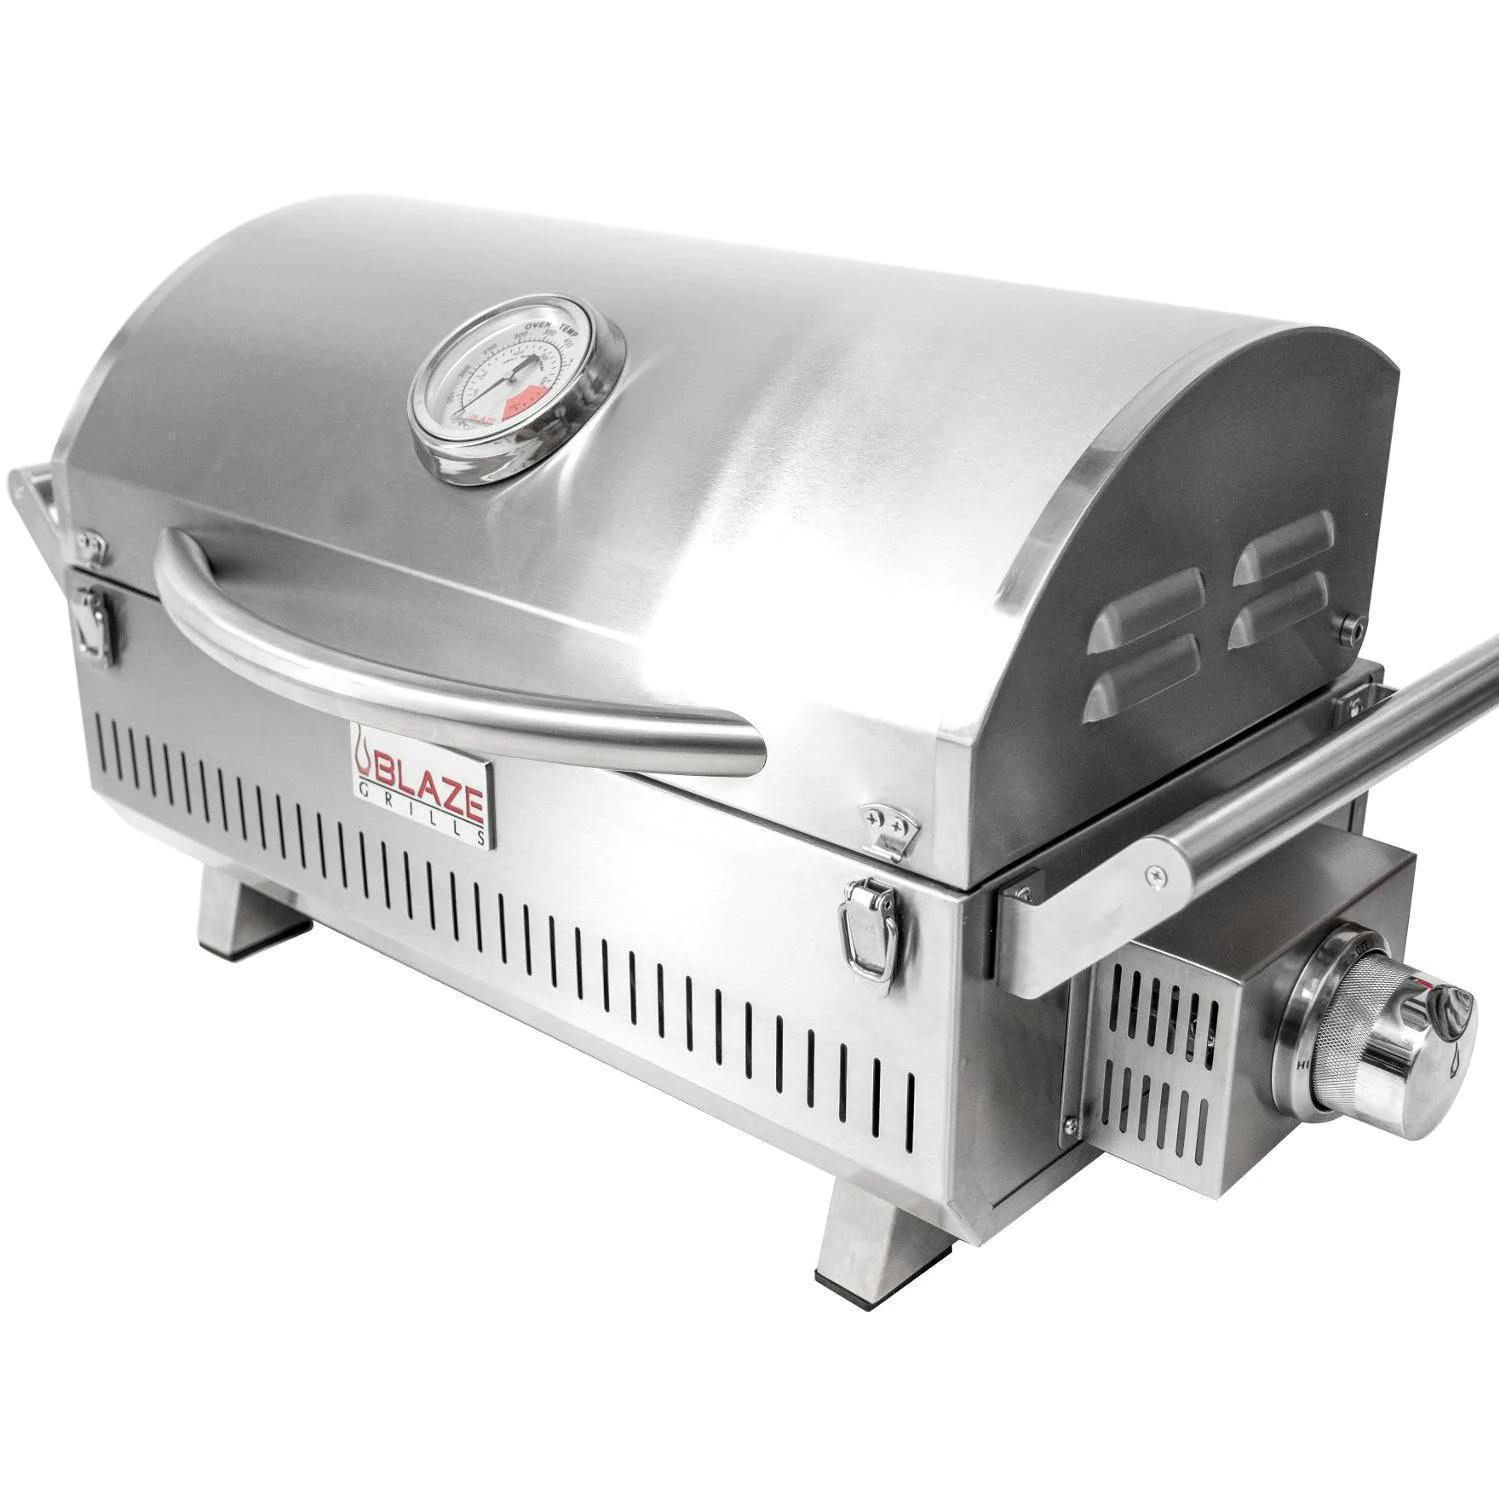 Blaze Professional LUX Portable Gas Grill